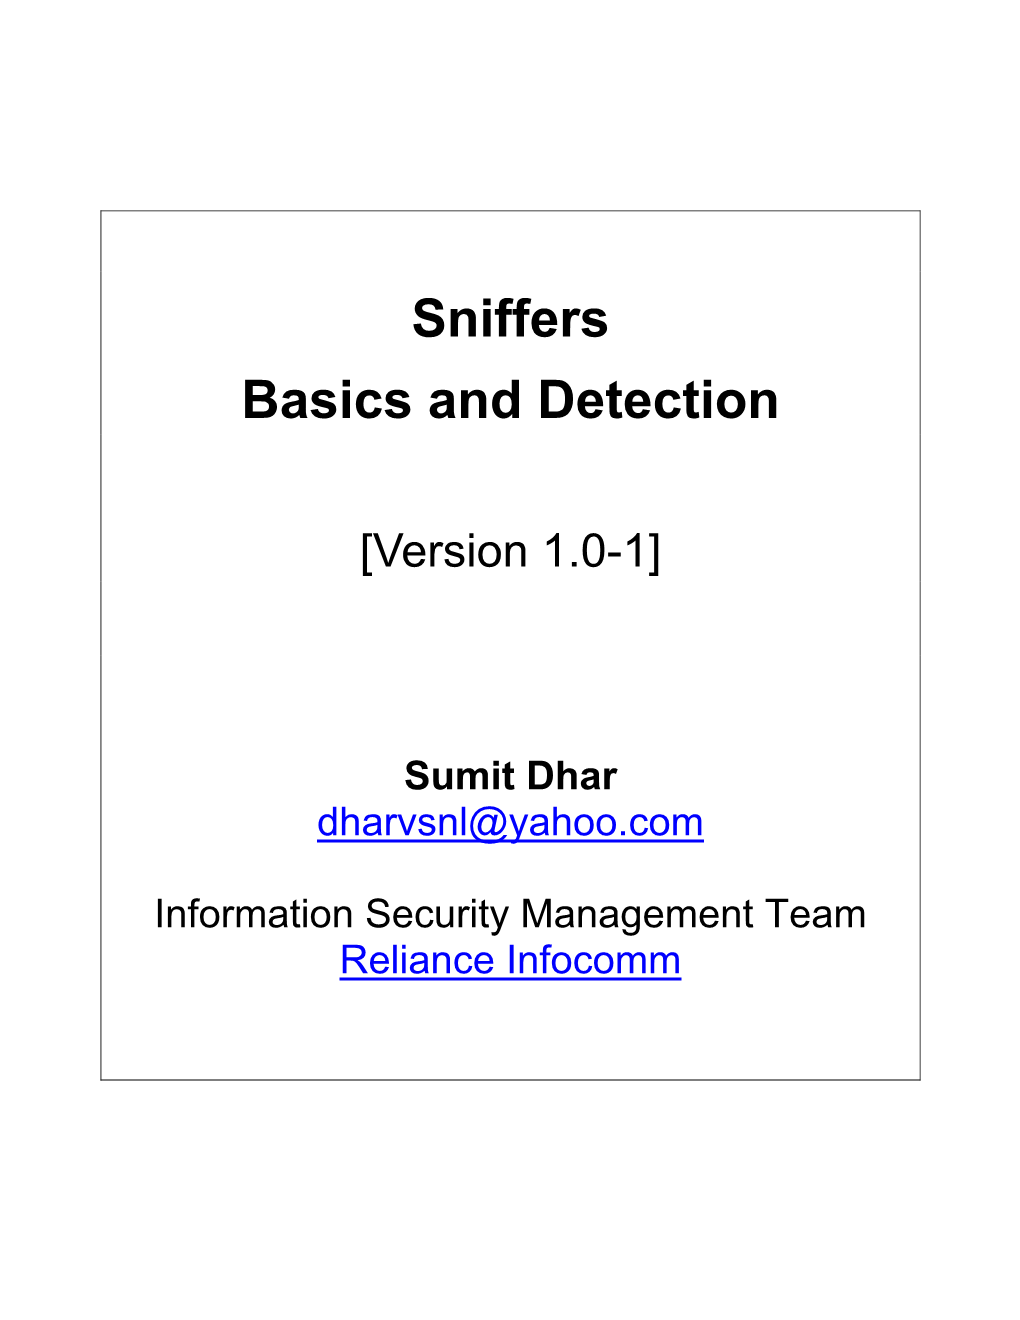 Sniffers Basics and Detection